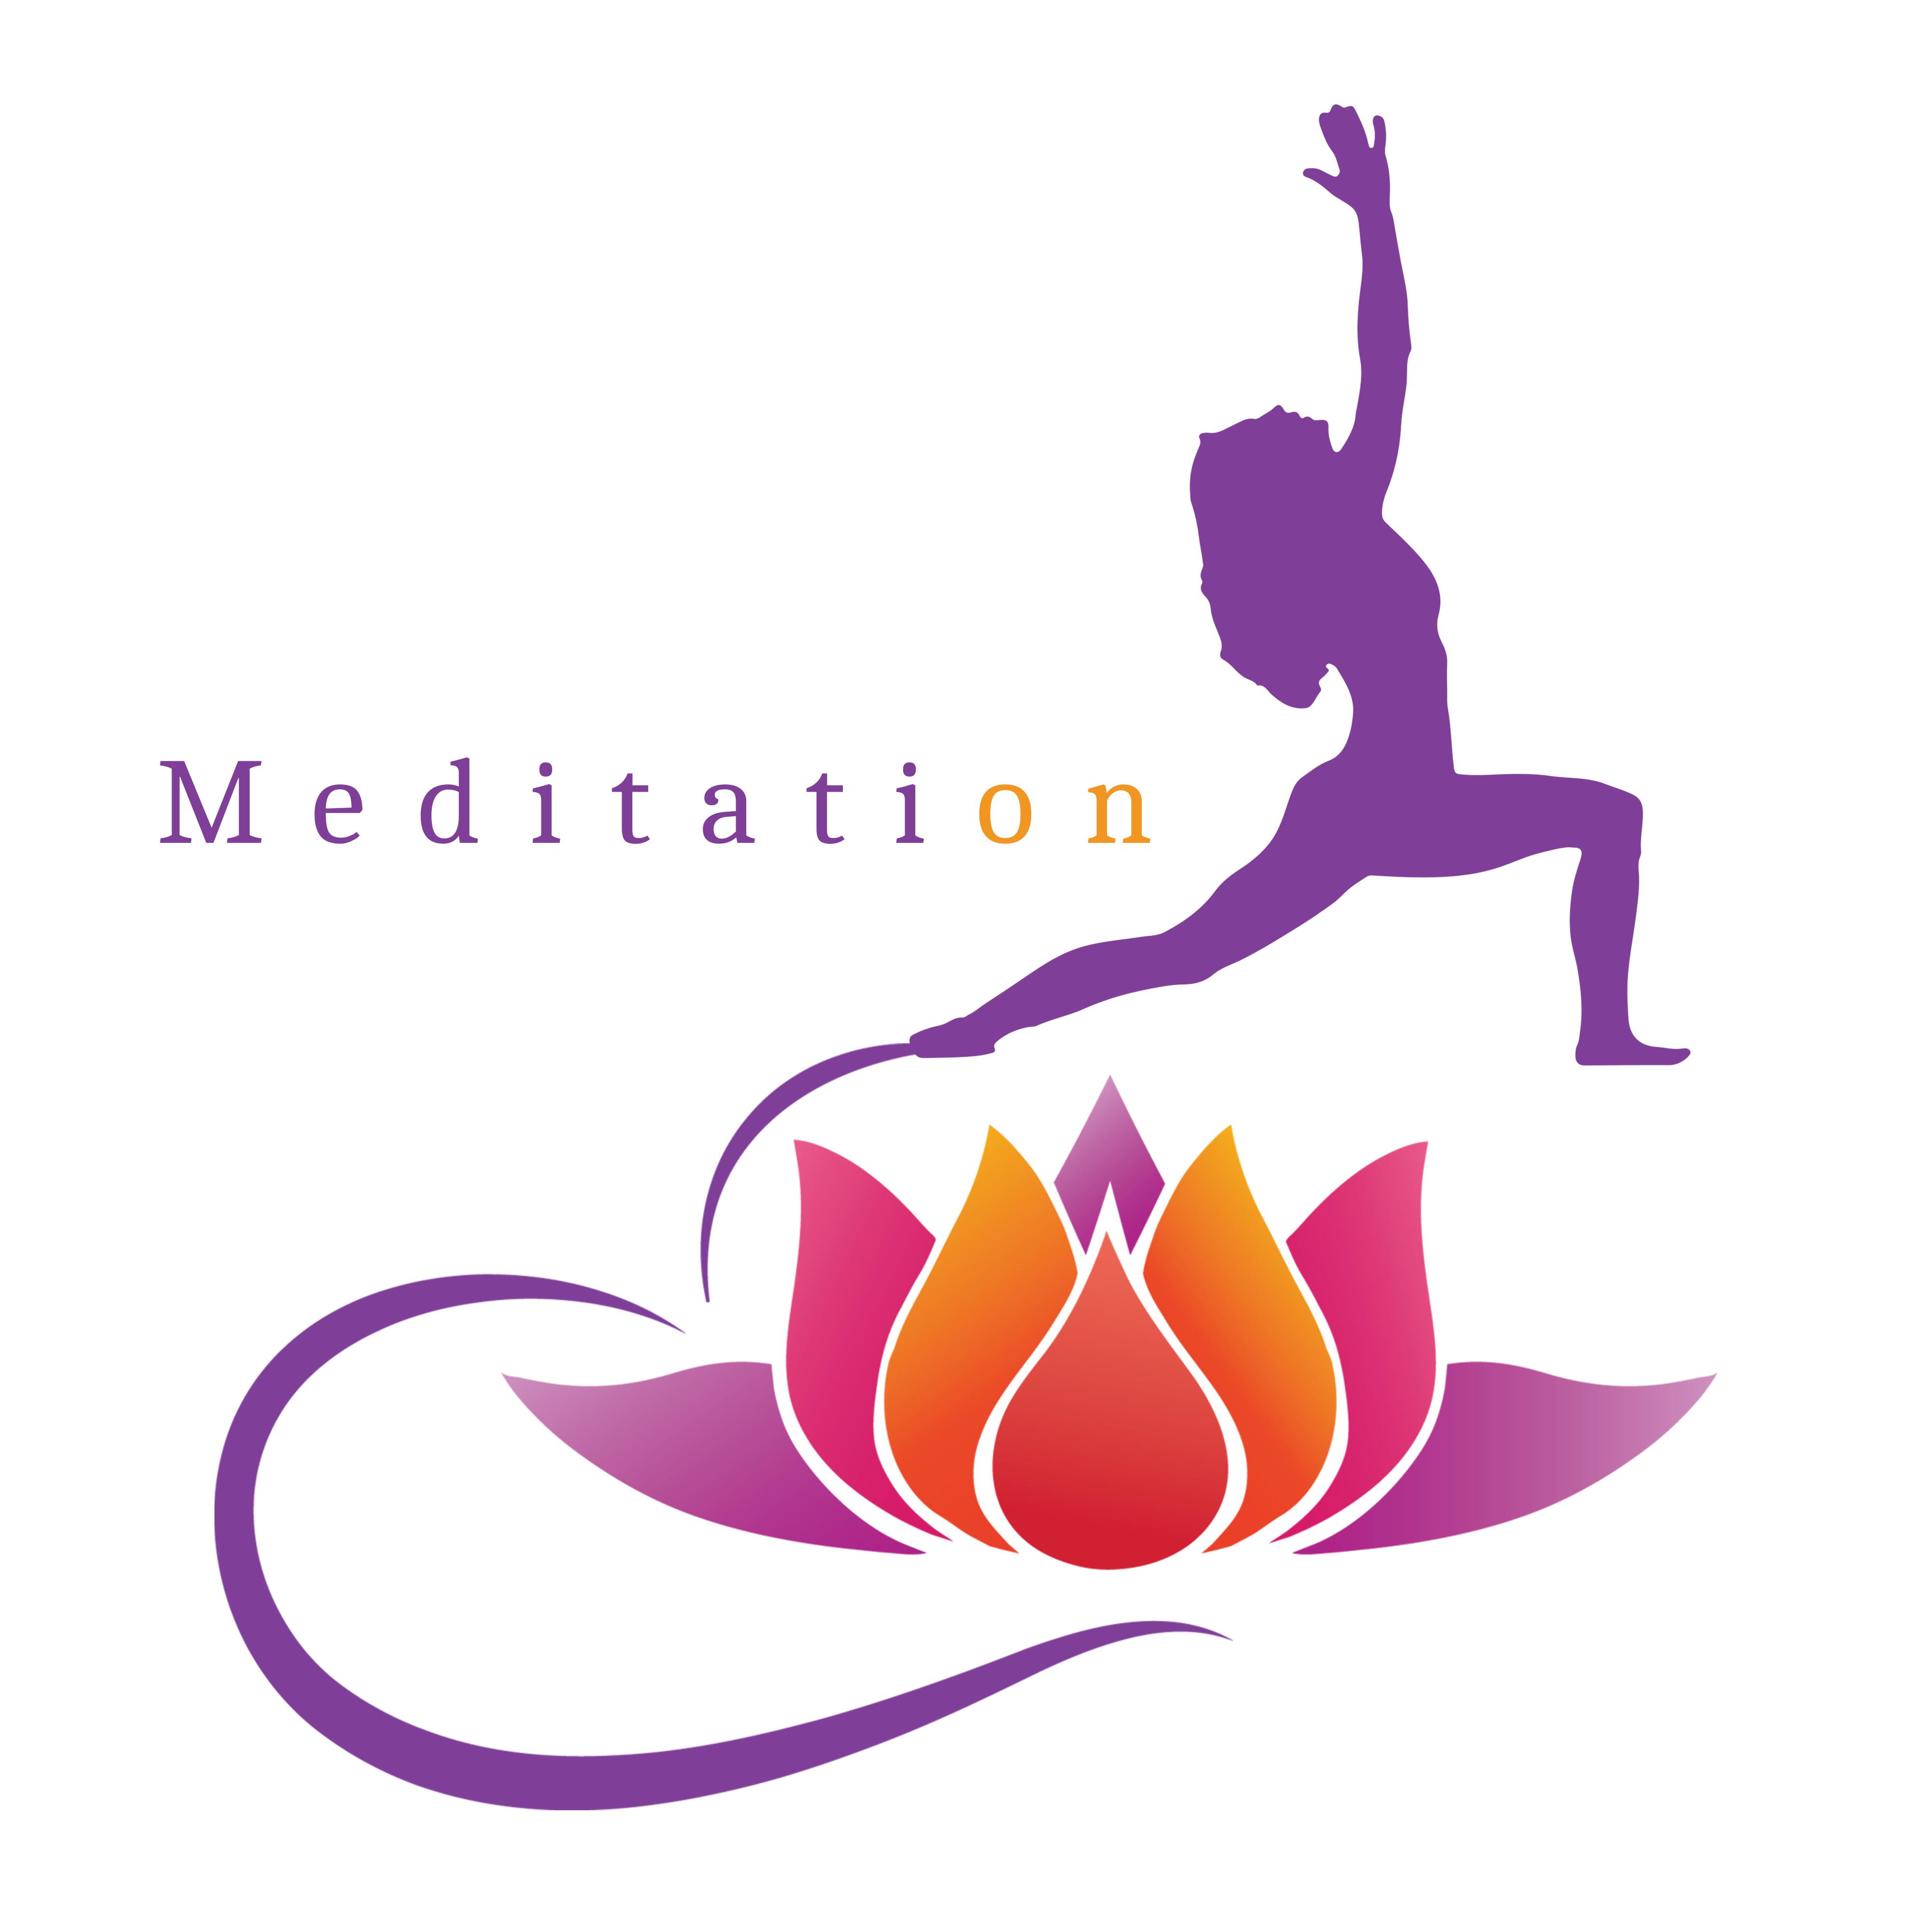 Meditation  Calm Down, Relaxation Sounds, Clear Mind, Focus, Concentration, Training Yoga, Stress Free, Calmness